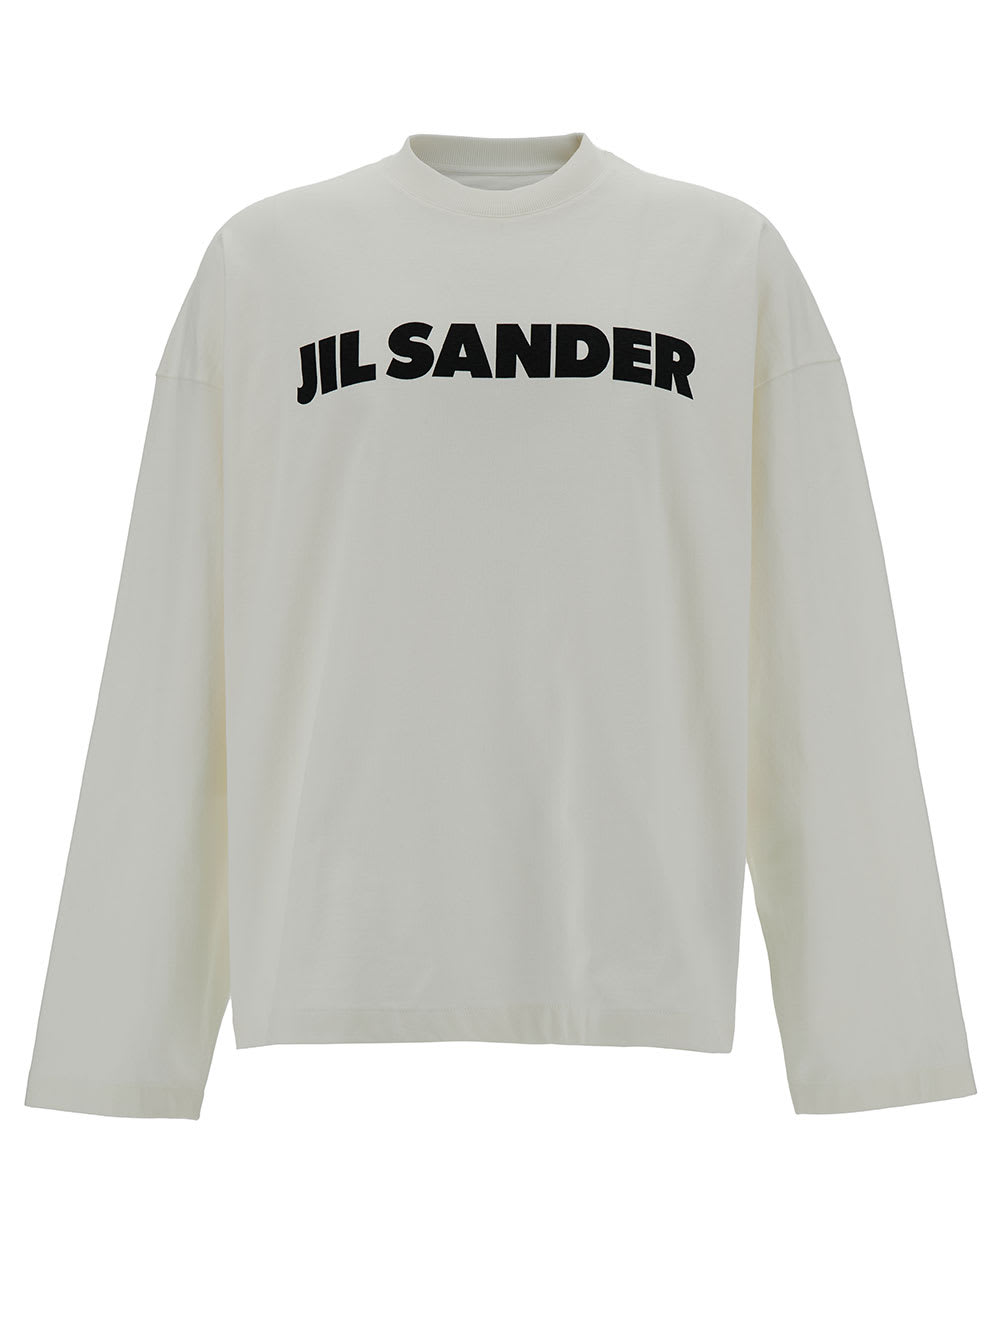 Jil Sander White Long Sleeve T-shirt With Contrasting Logo Print In Lightweight Cotton Man